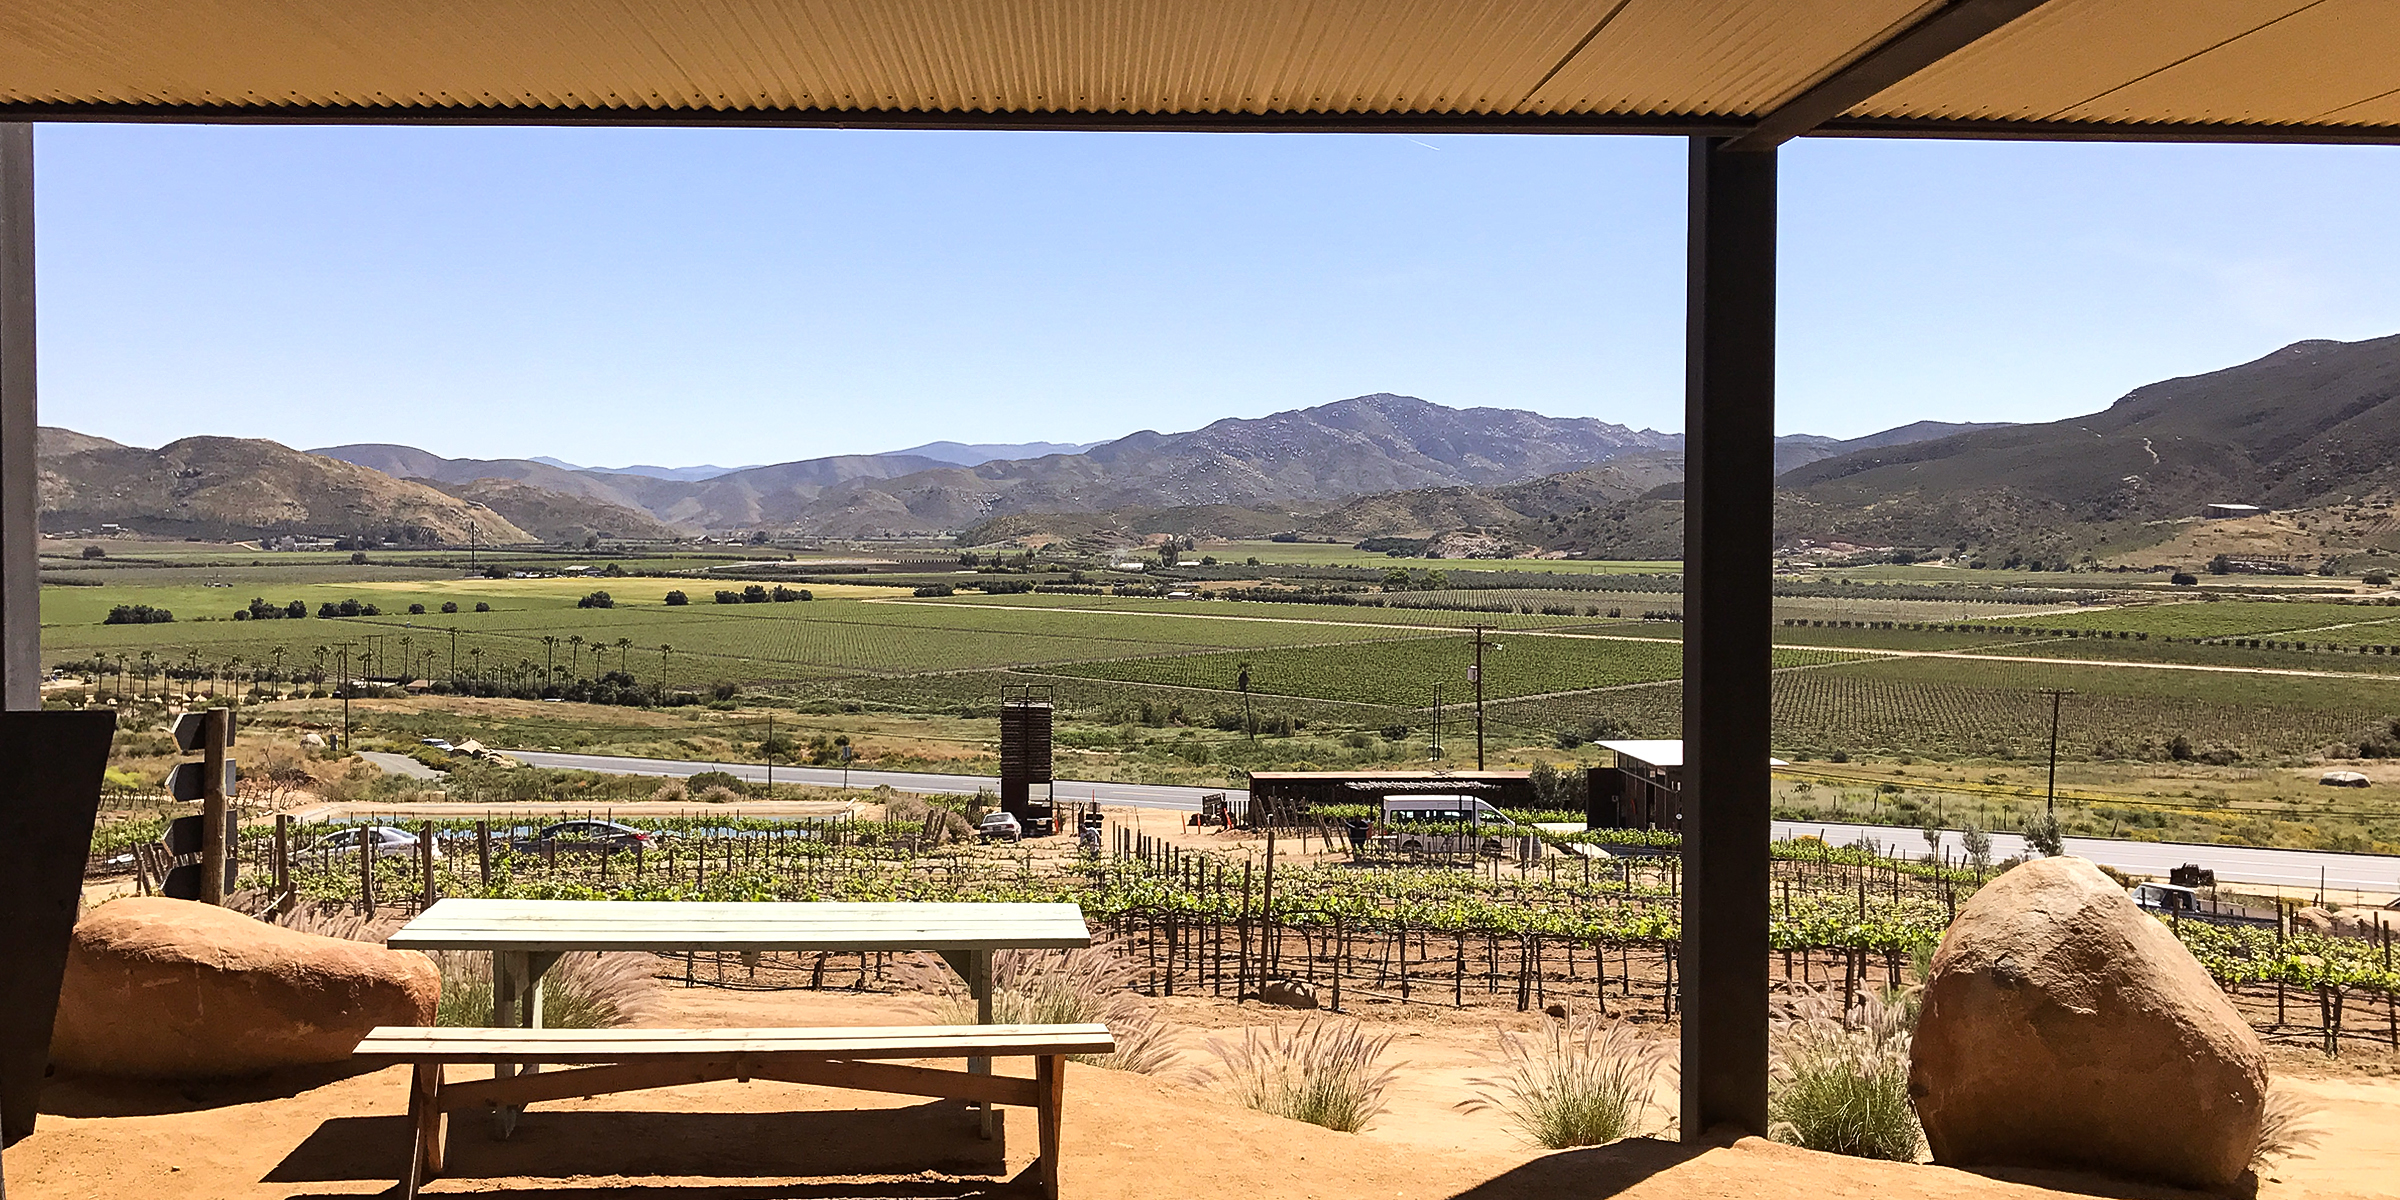 Valle de Guadalupe, Mexico | Source: Flickr/T.Tseng/CC BY 2.0